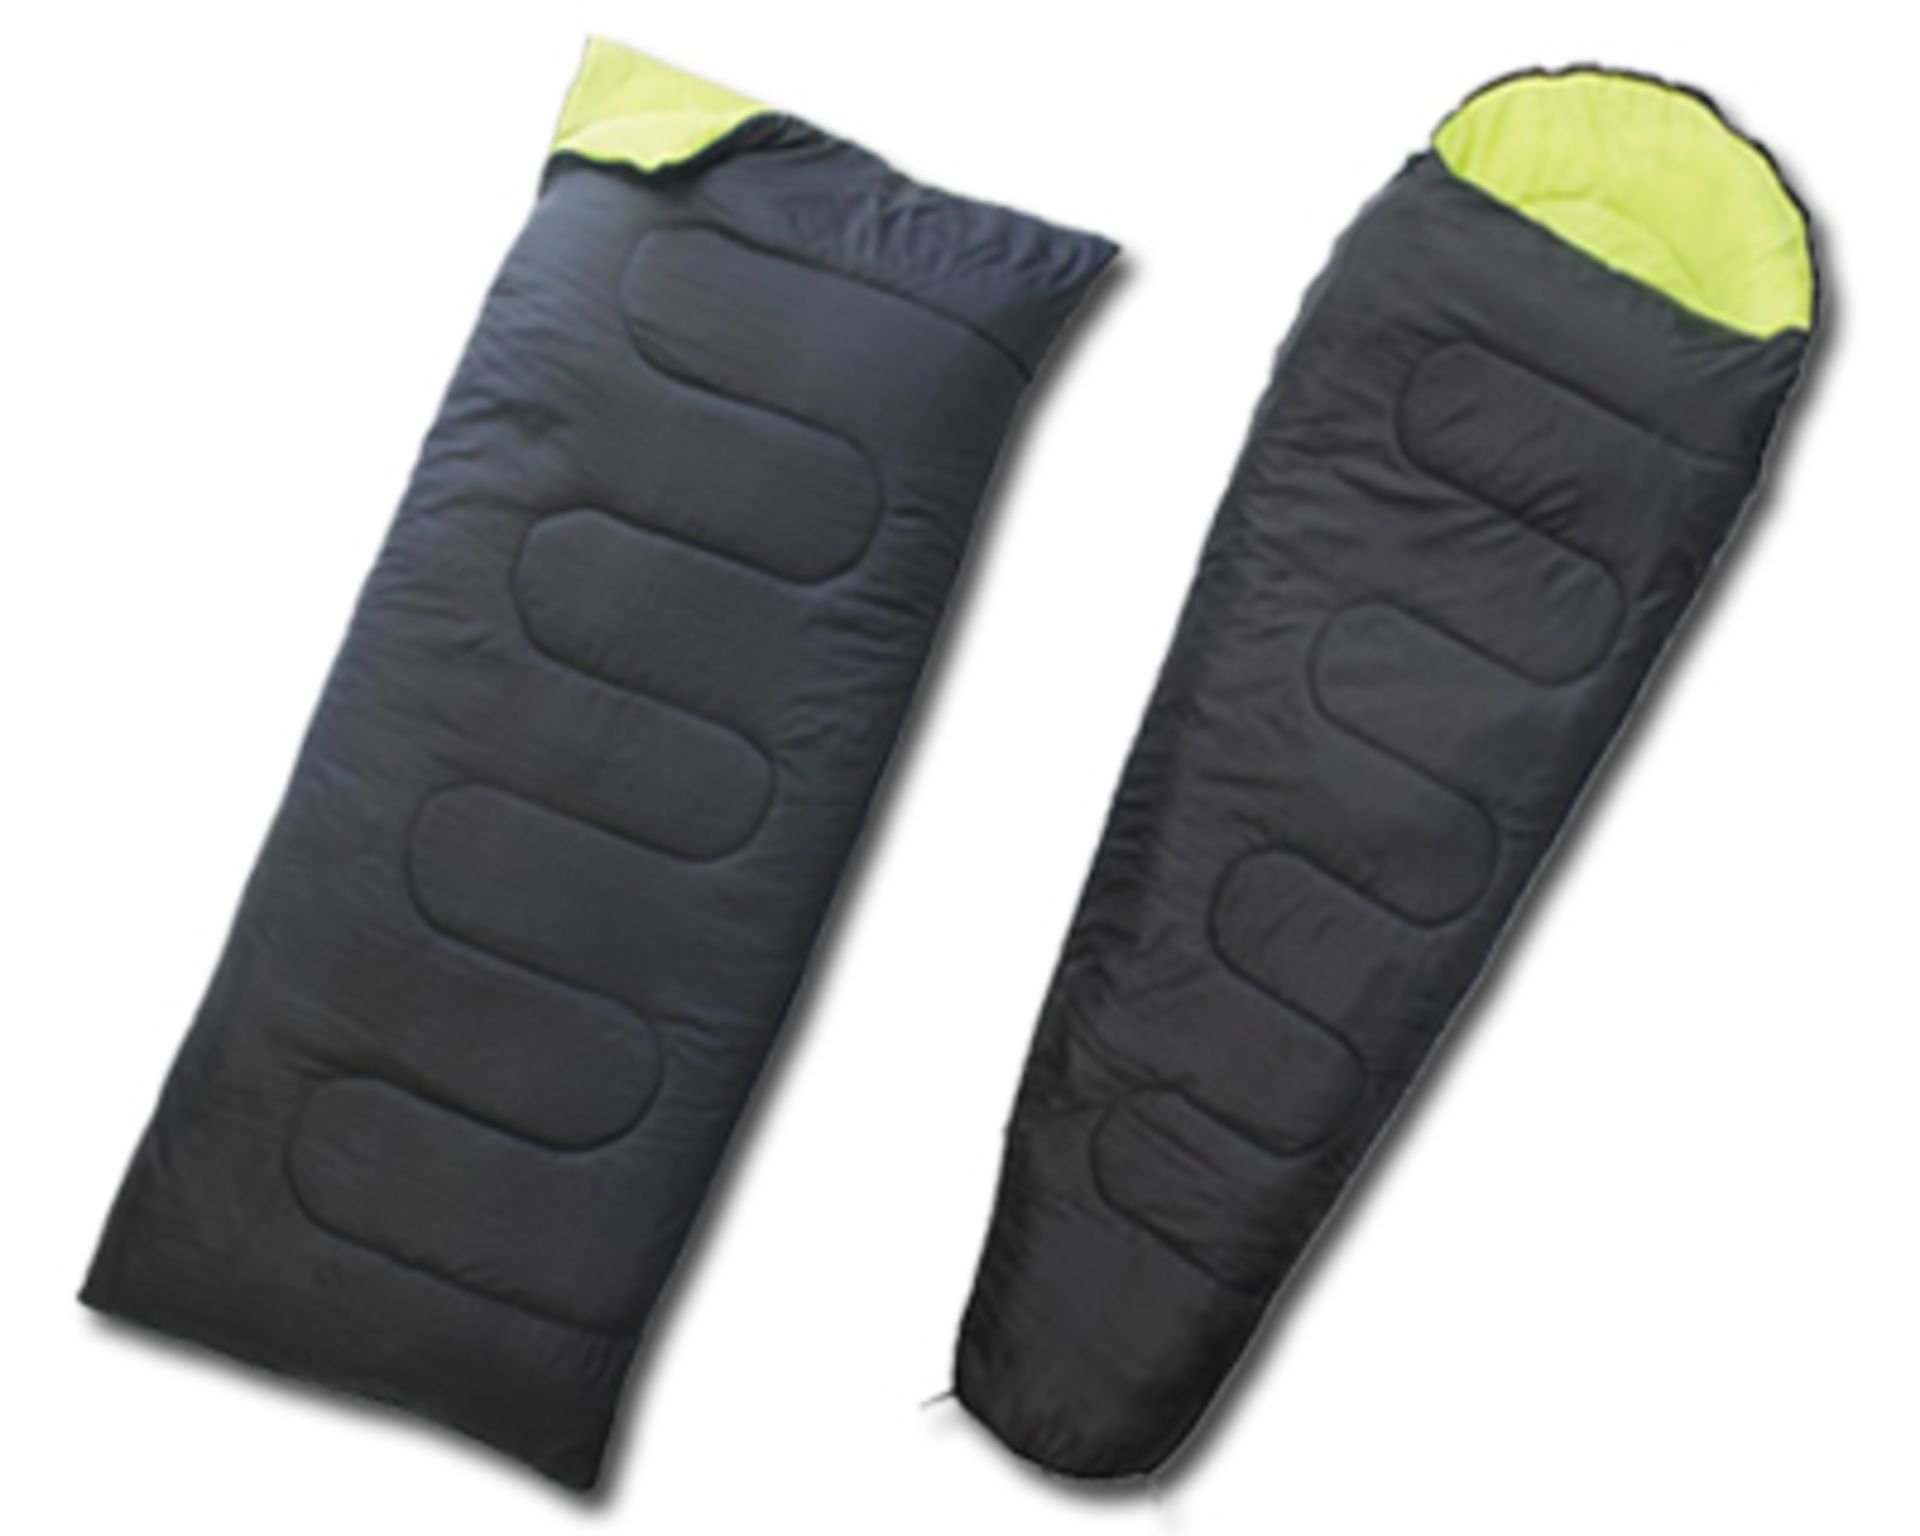 V Brand New Mummy Sleeping Bag X 2 YOUR BID PRICE TO BE MULTIPLIED BY TWO